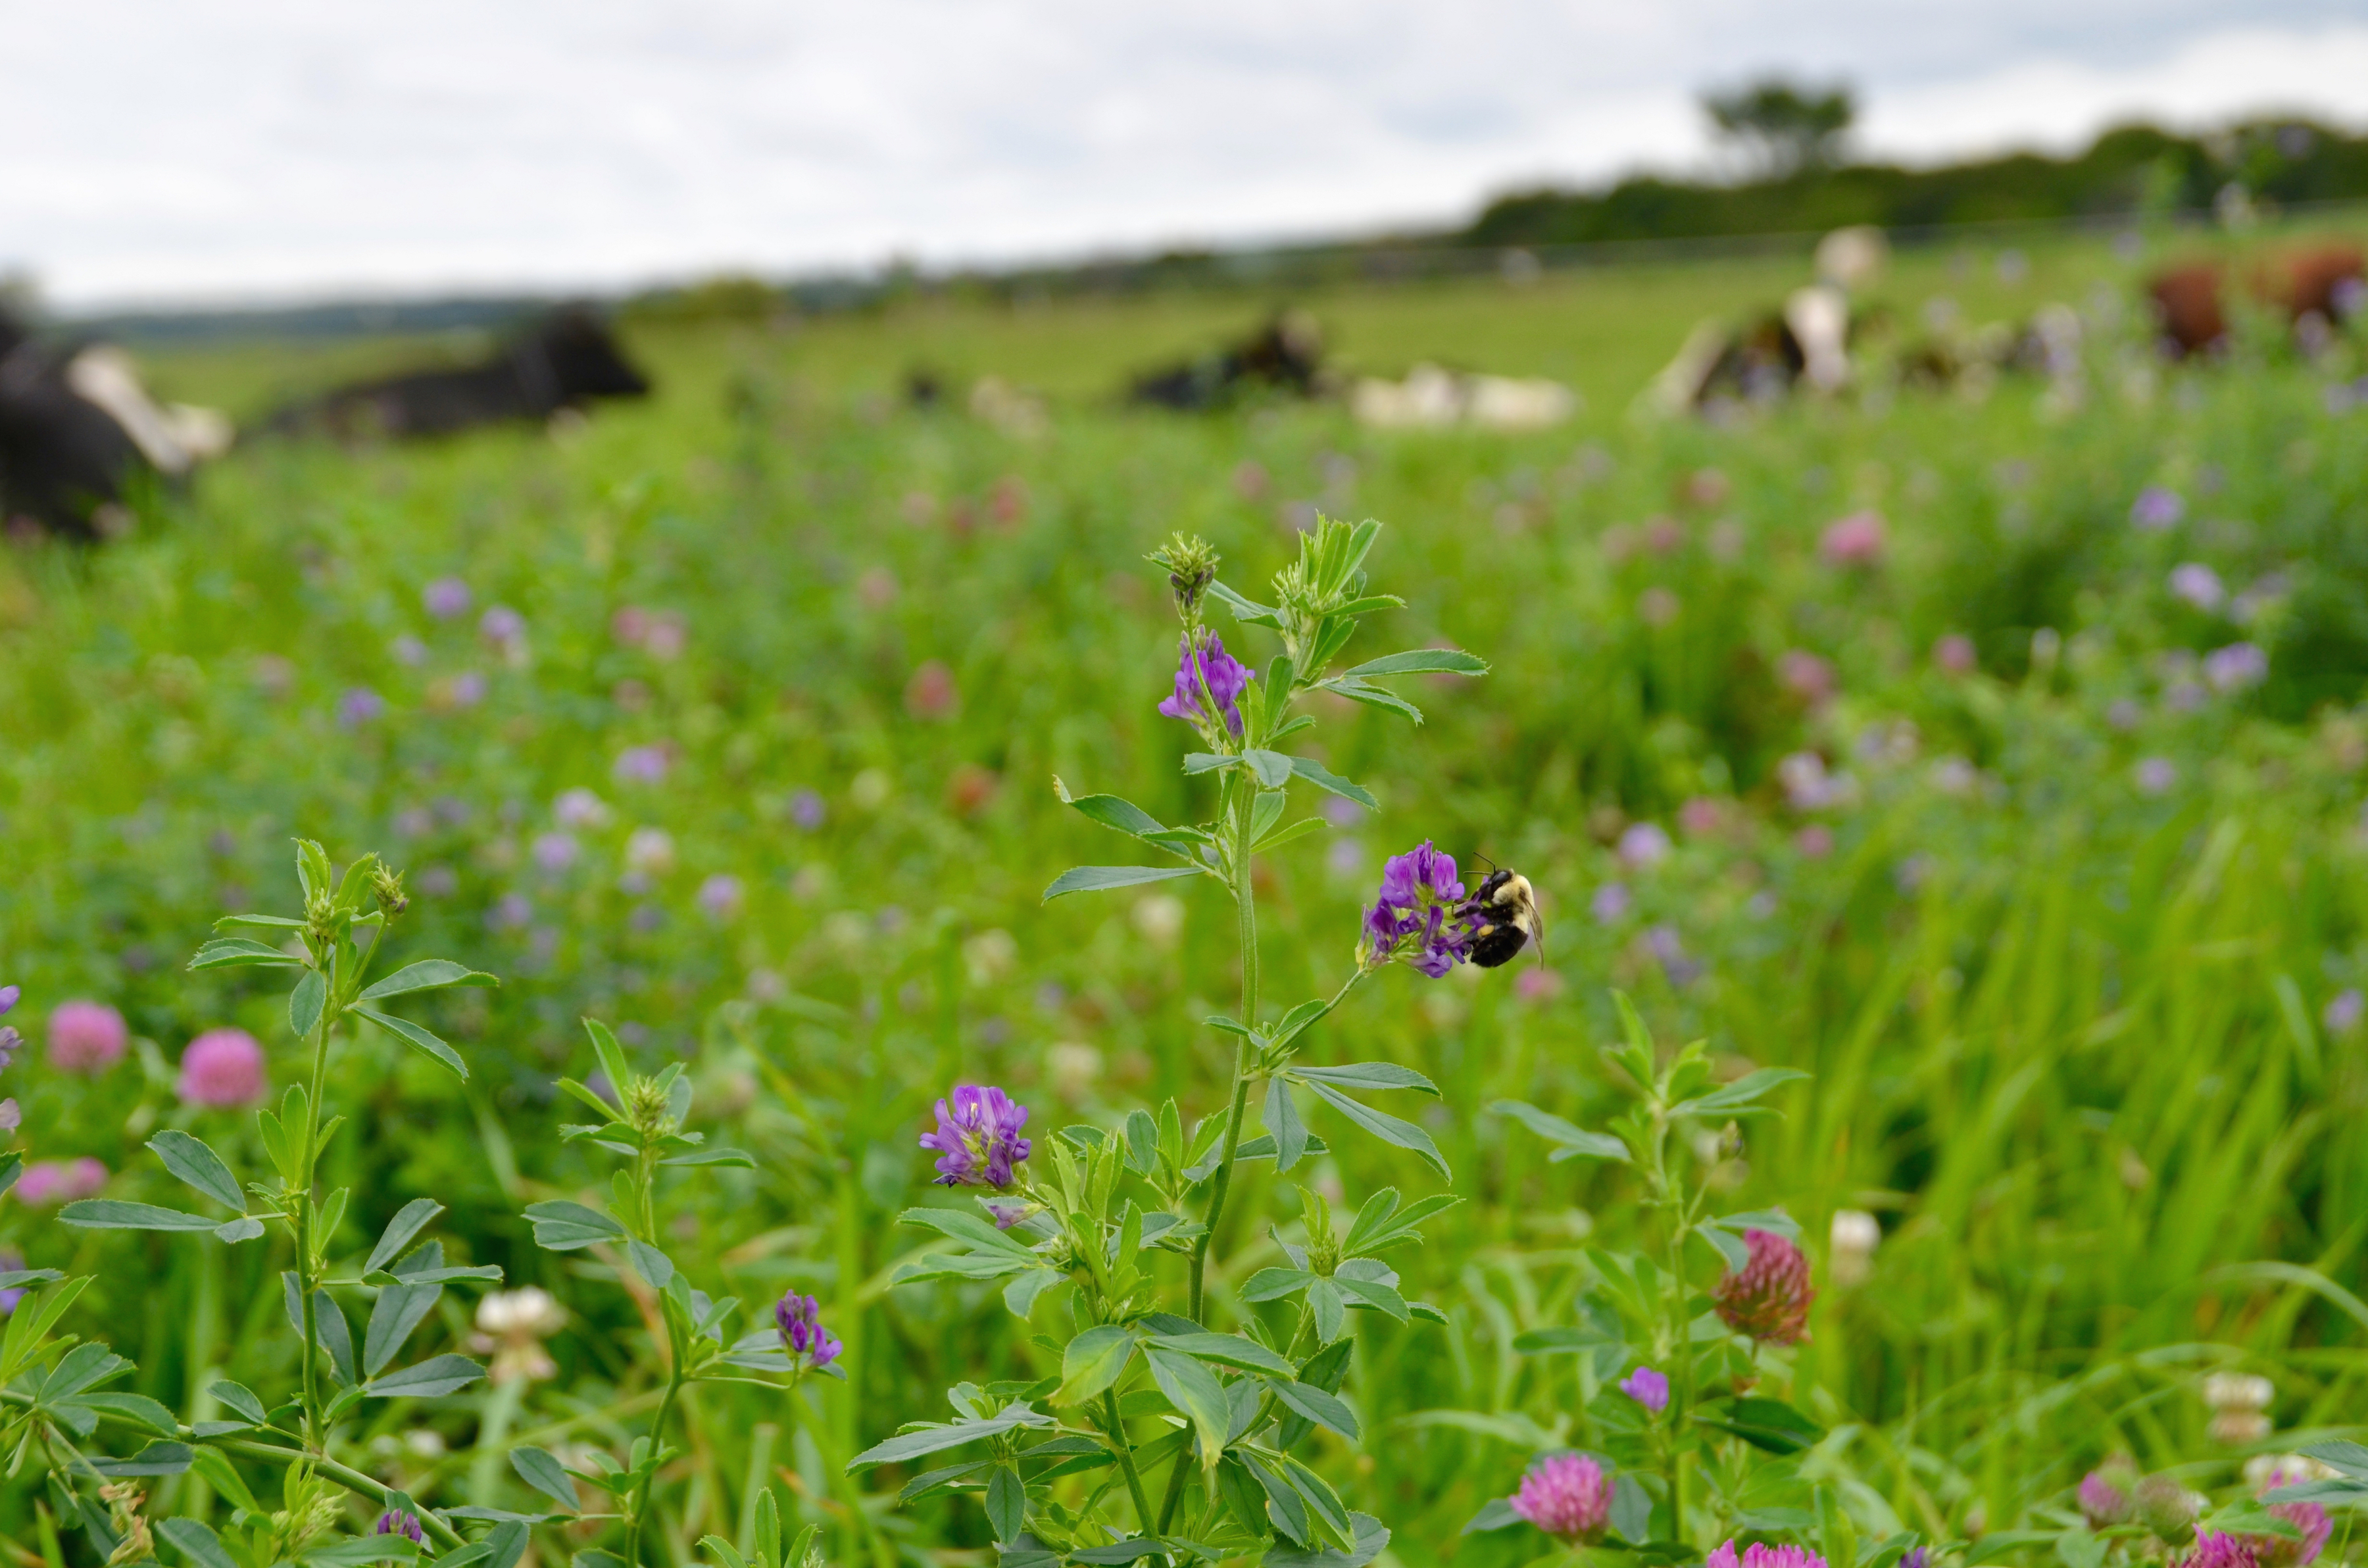 A dark-colored bumble bee holds tightly to a purple flower in a field. There are blurred-out cows in the background of this image, which has a shallow depth-of-field.